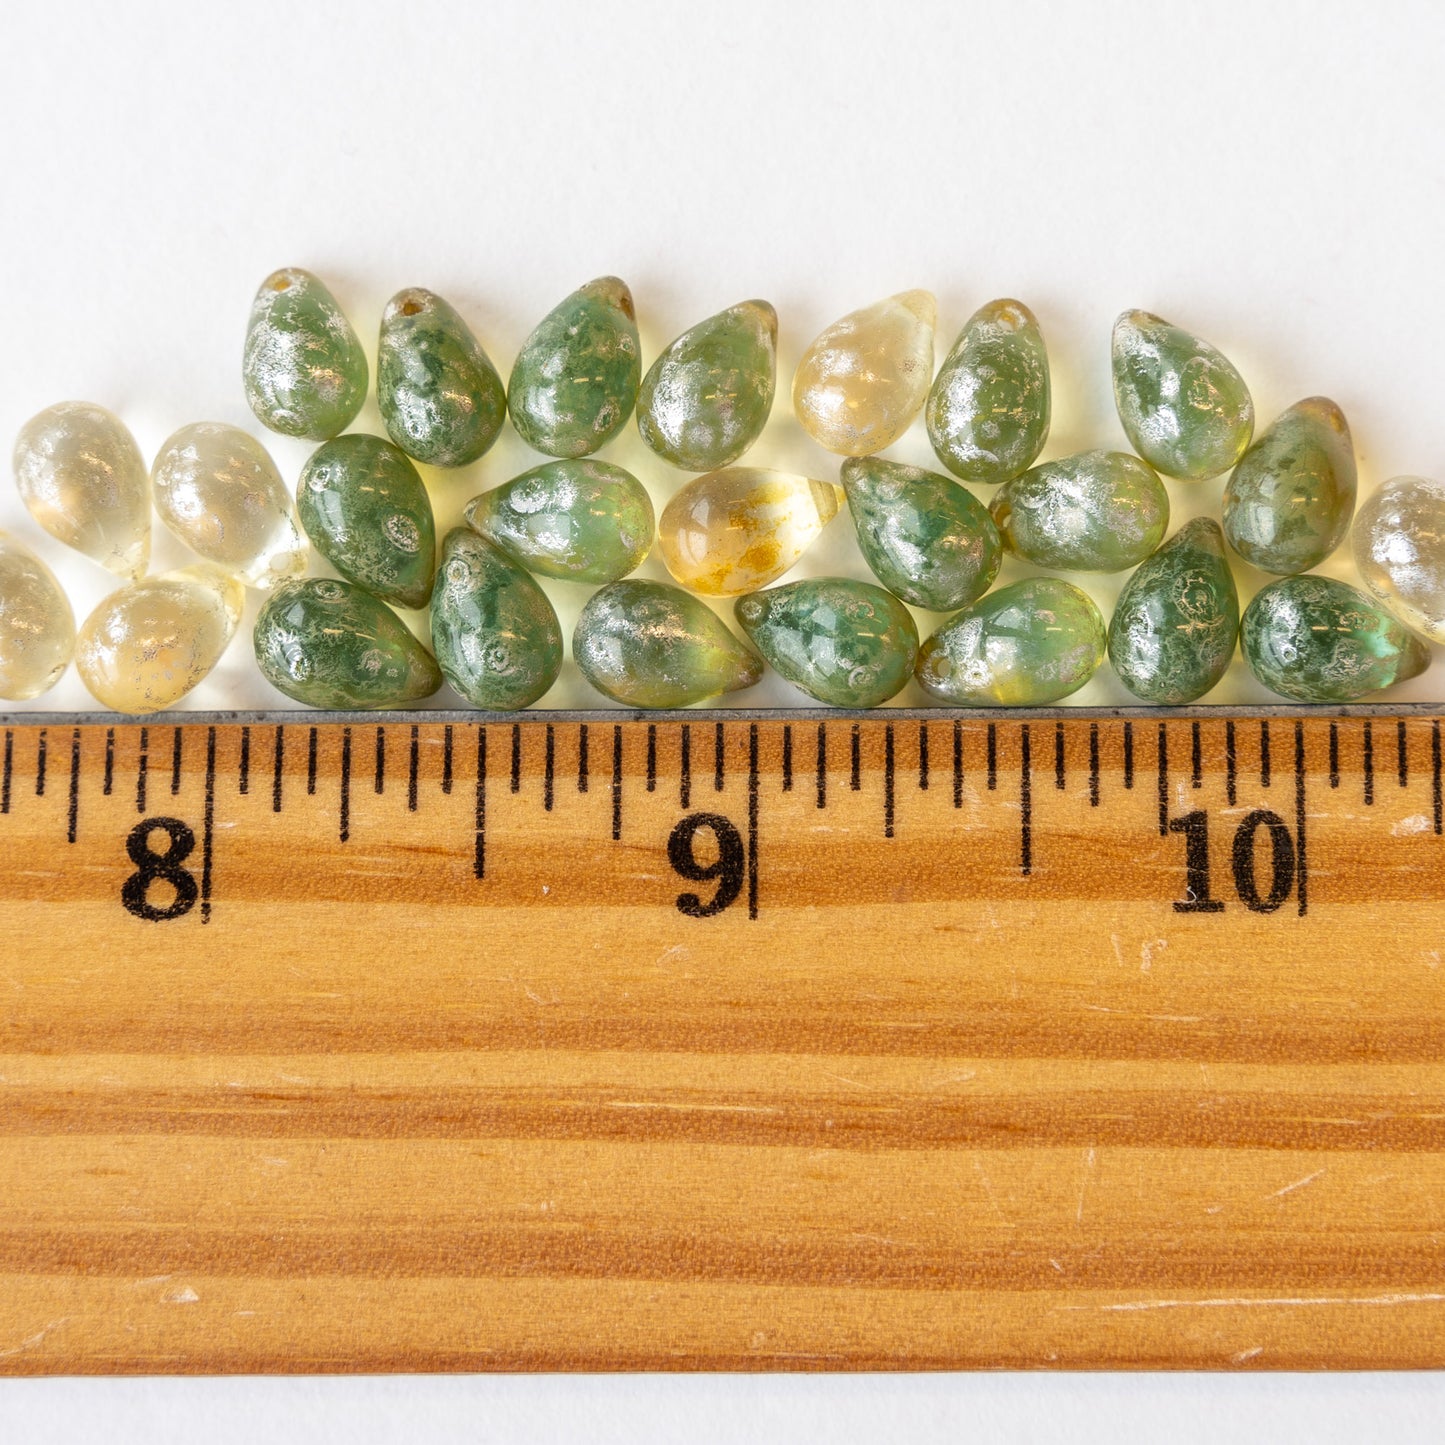 6x9mm Teardrop Beads - Celadon and Champagne - 25